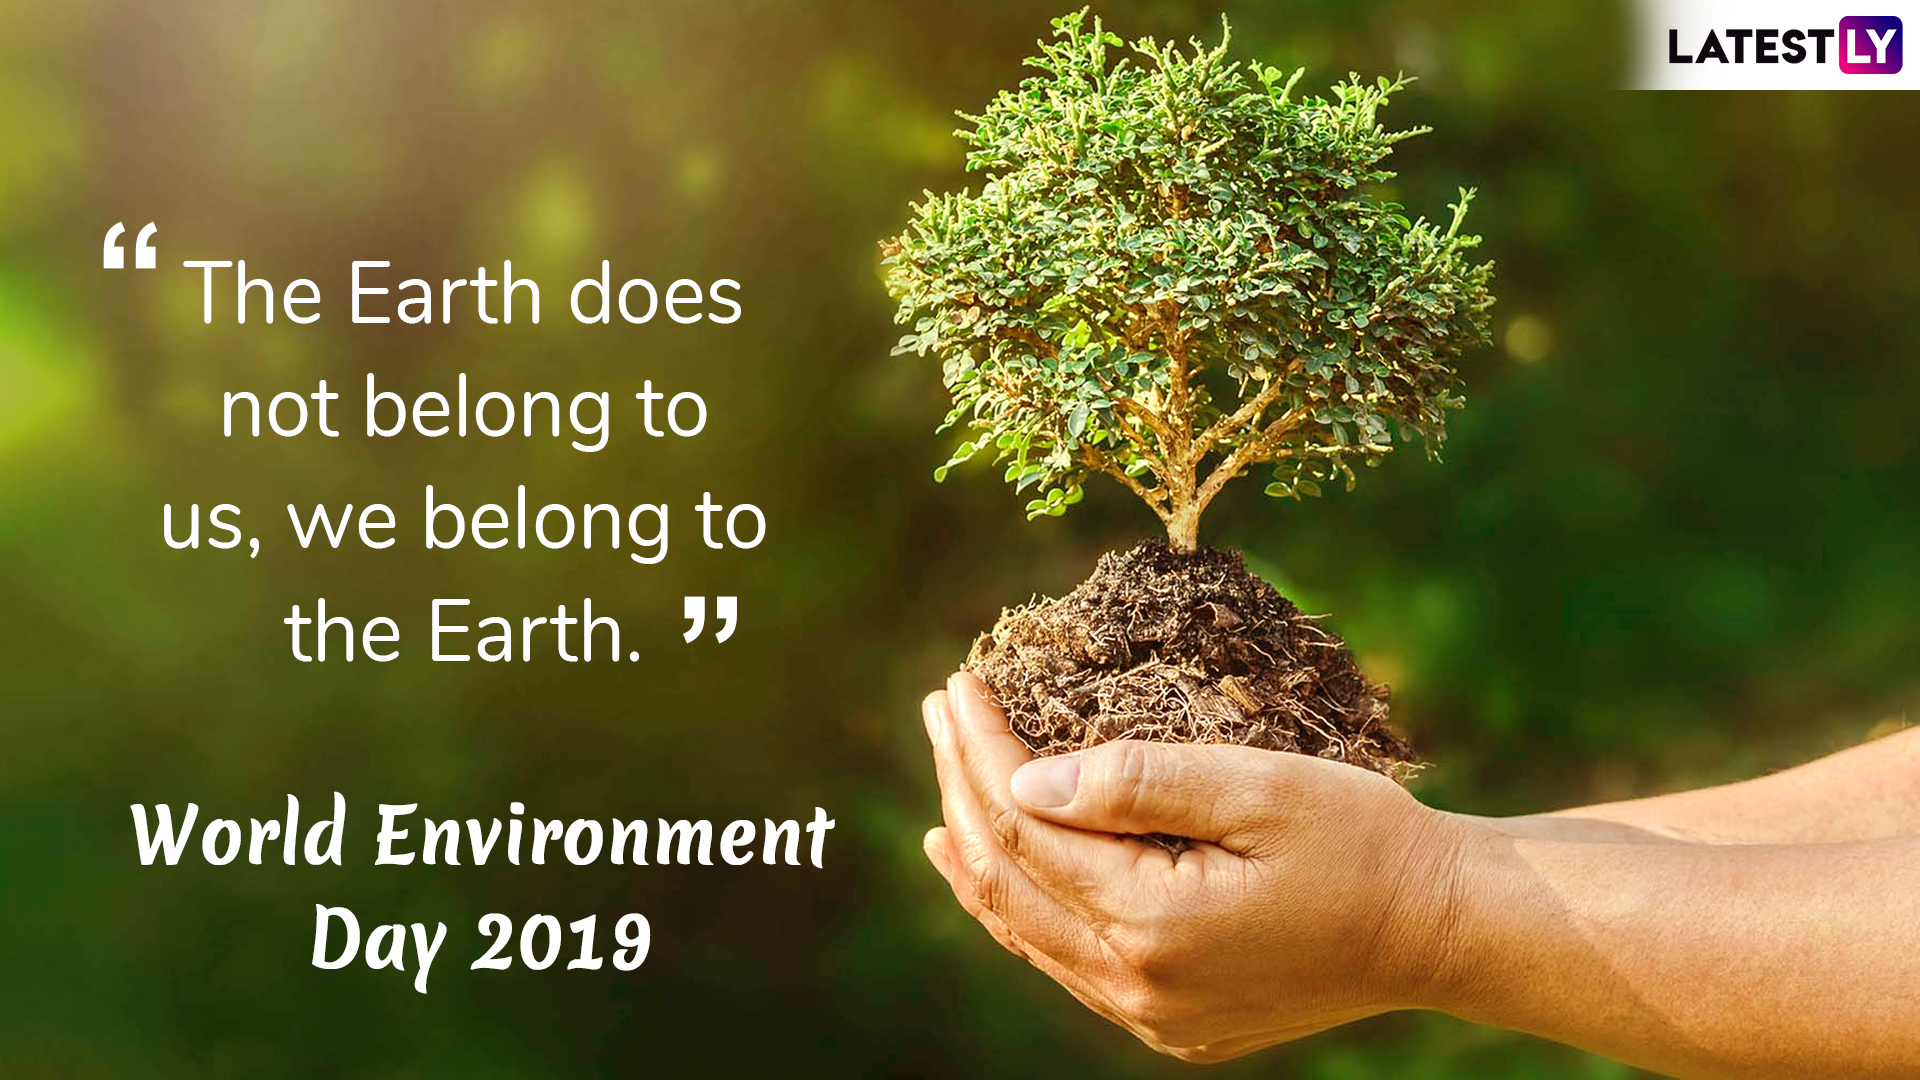 World Environment Day 2019 Greetings And Messages: WhatsApp Stickers